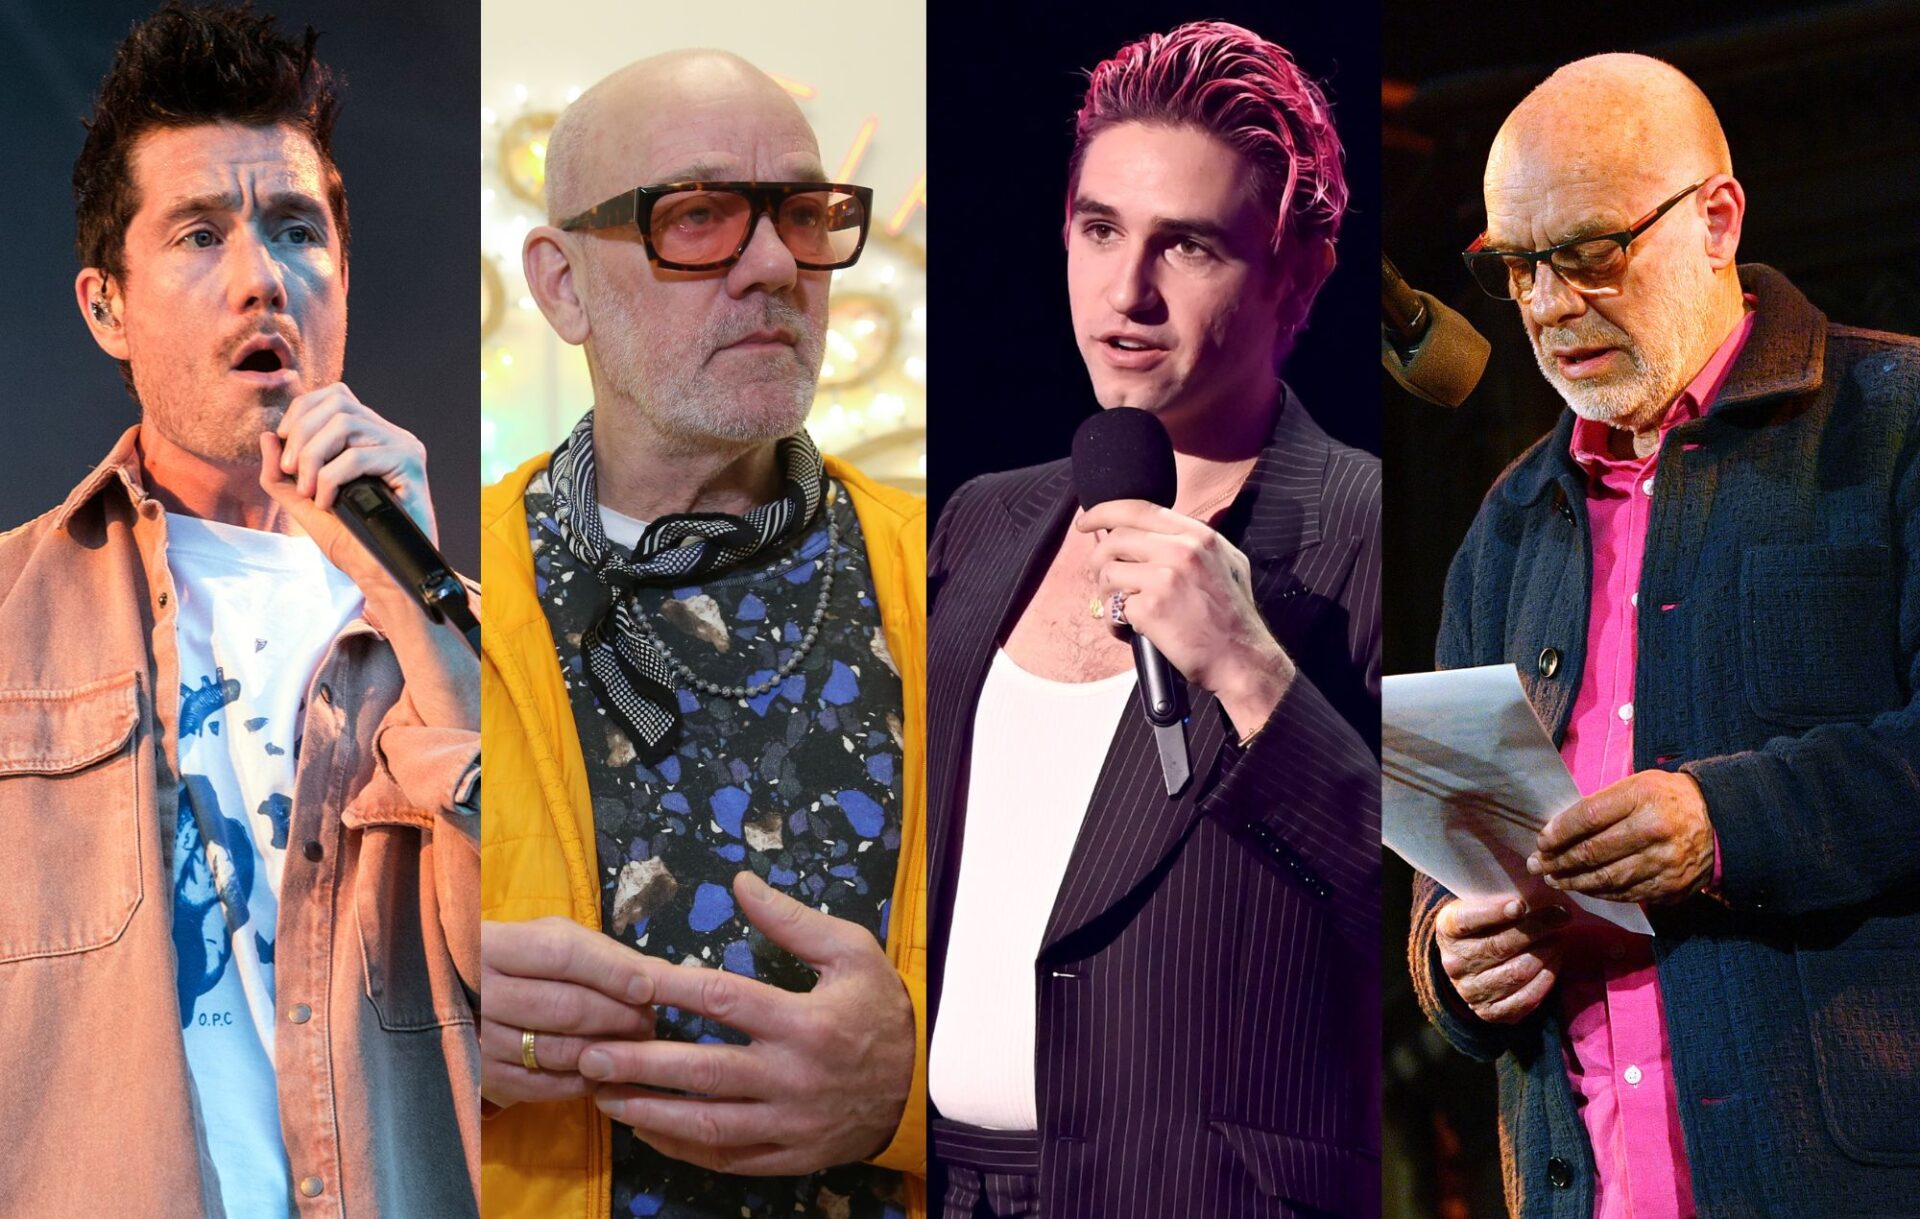 Watch Brian Eno, Fontaines D.C.'s Carlos O’Connell, Michael Stipe and Bastille's Dan Smith read 'Voices For Gaza' letters of Palestinian's war experience 